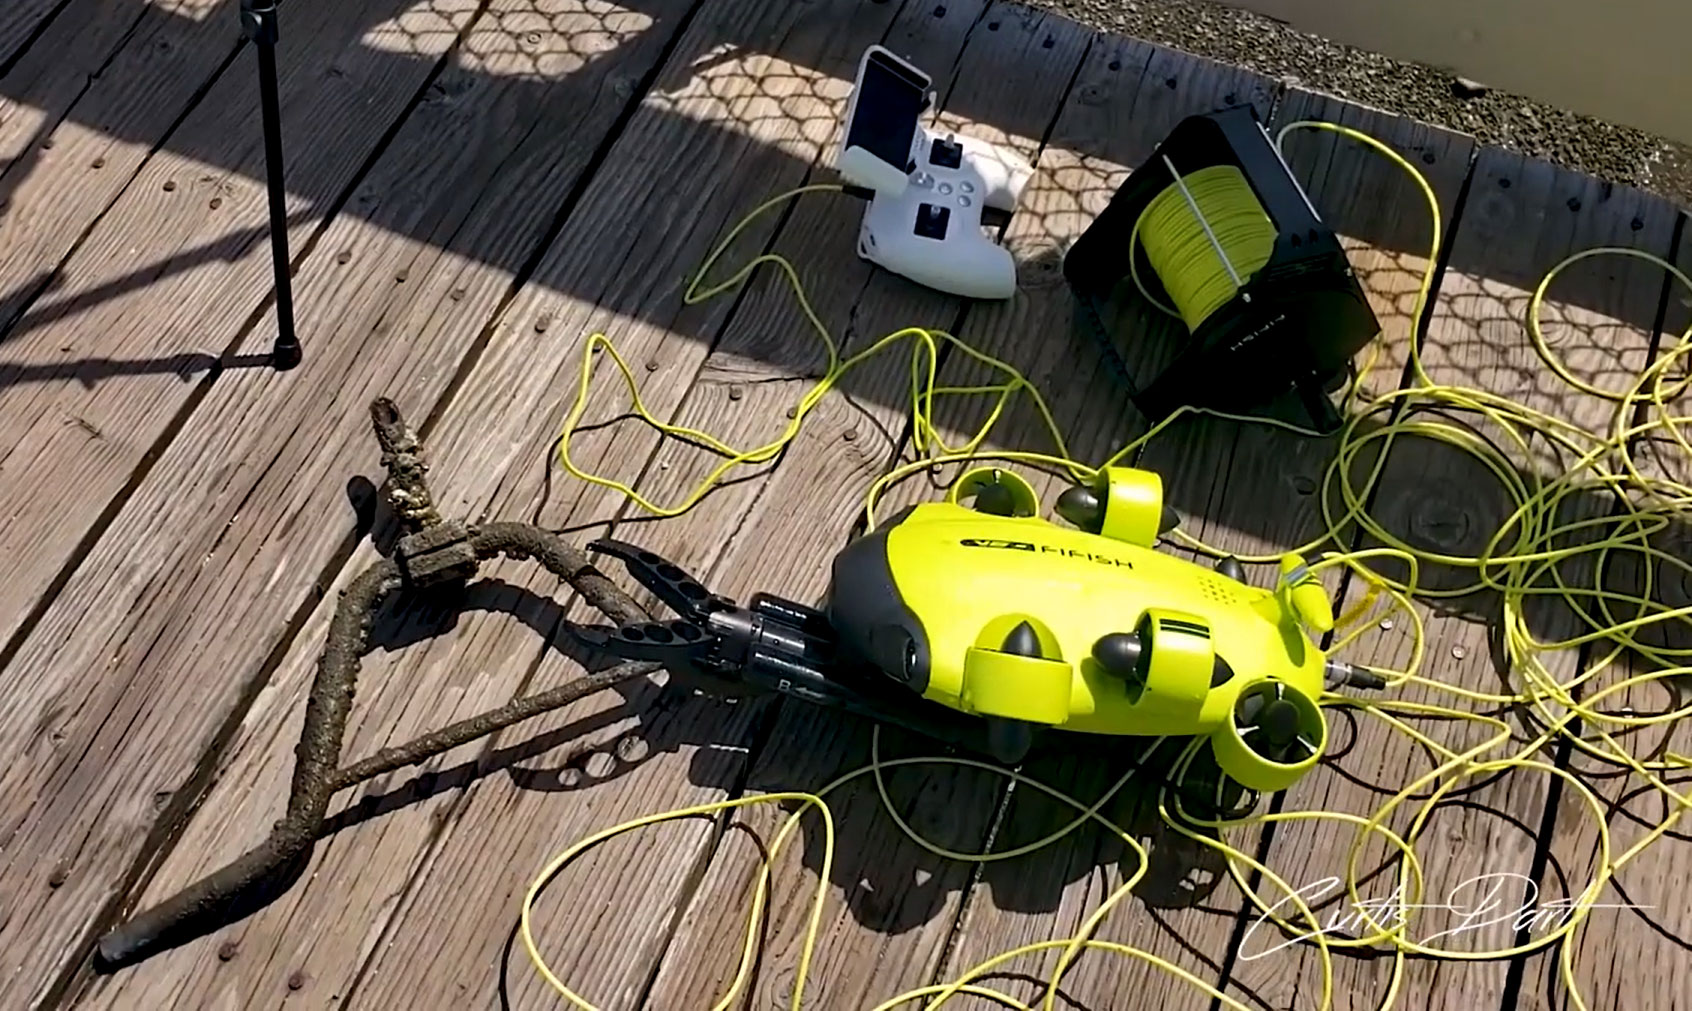 underwater-drone-claw-recovers-bicycle-handle-bars-budd-bay.jpg